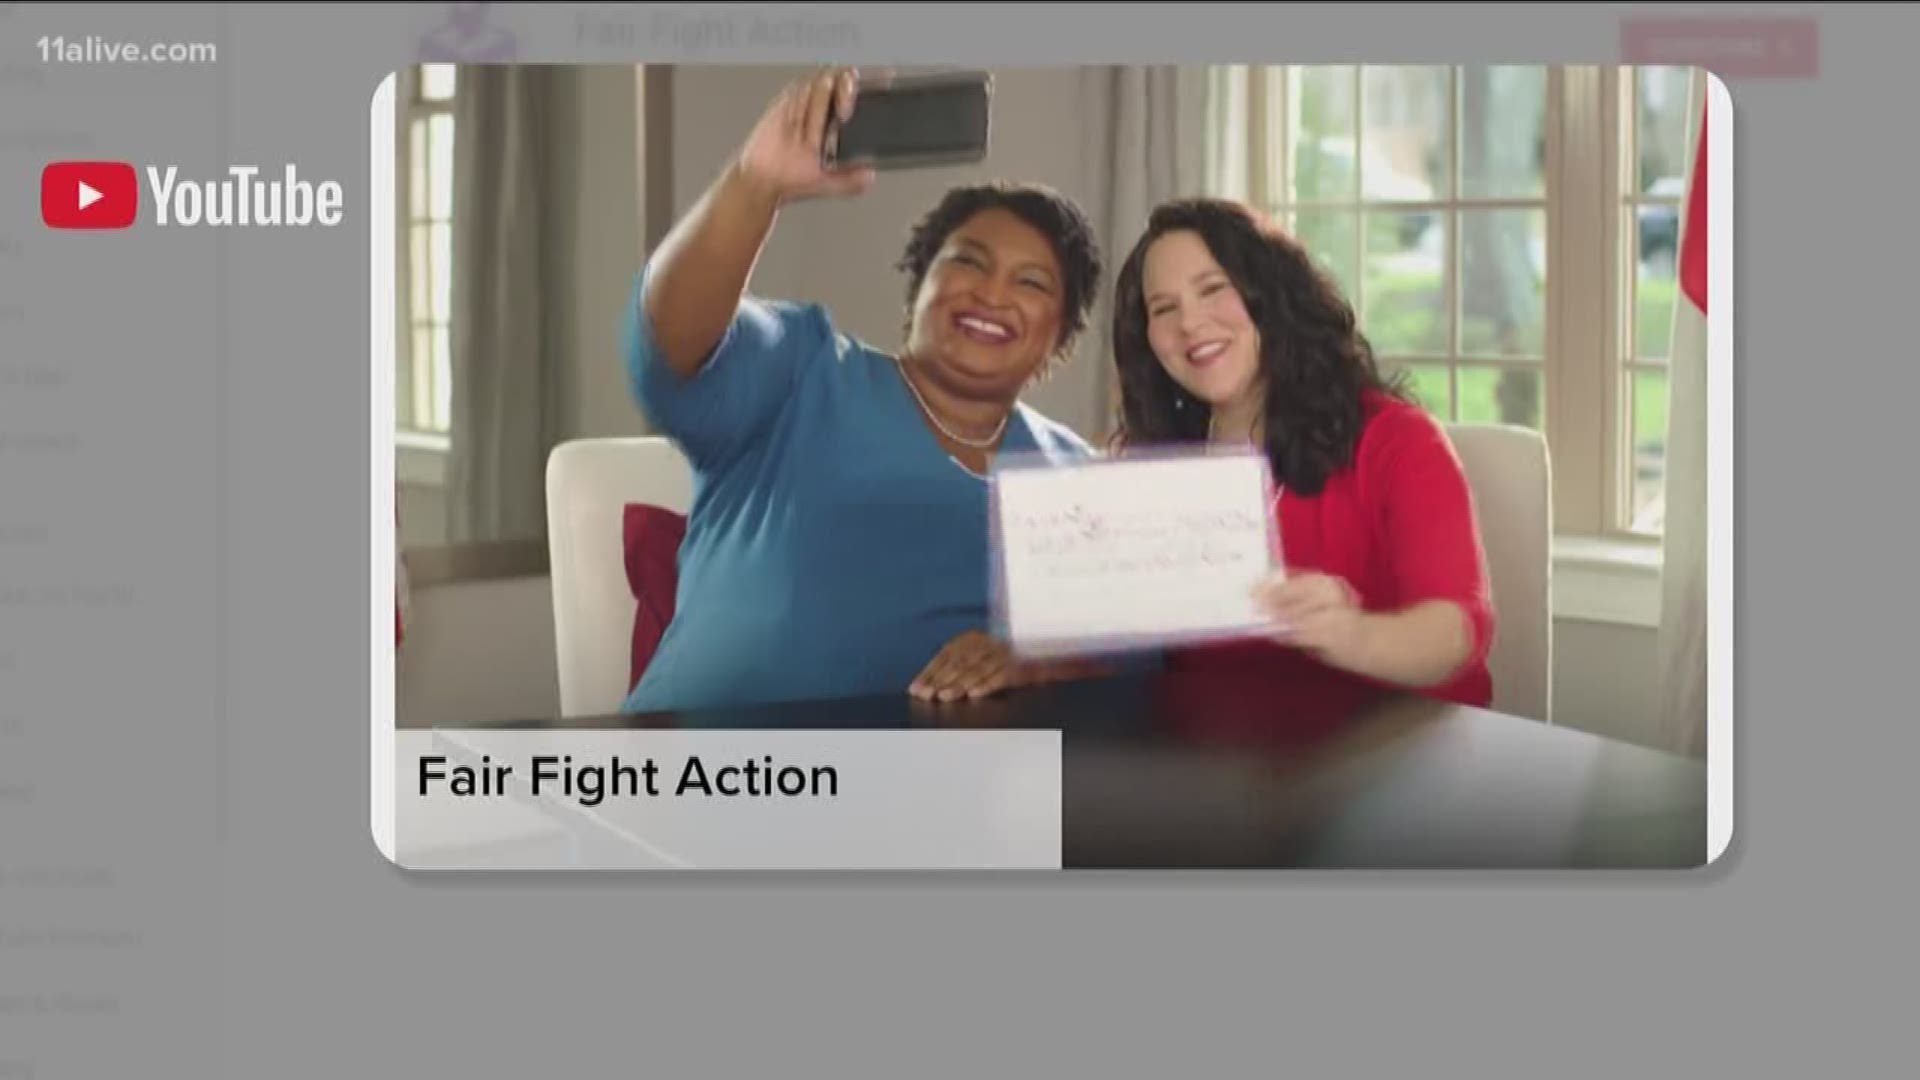 The ad is for Fair Fight Action